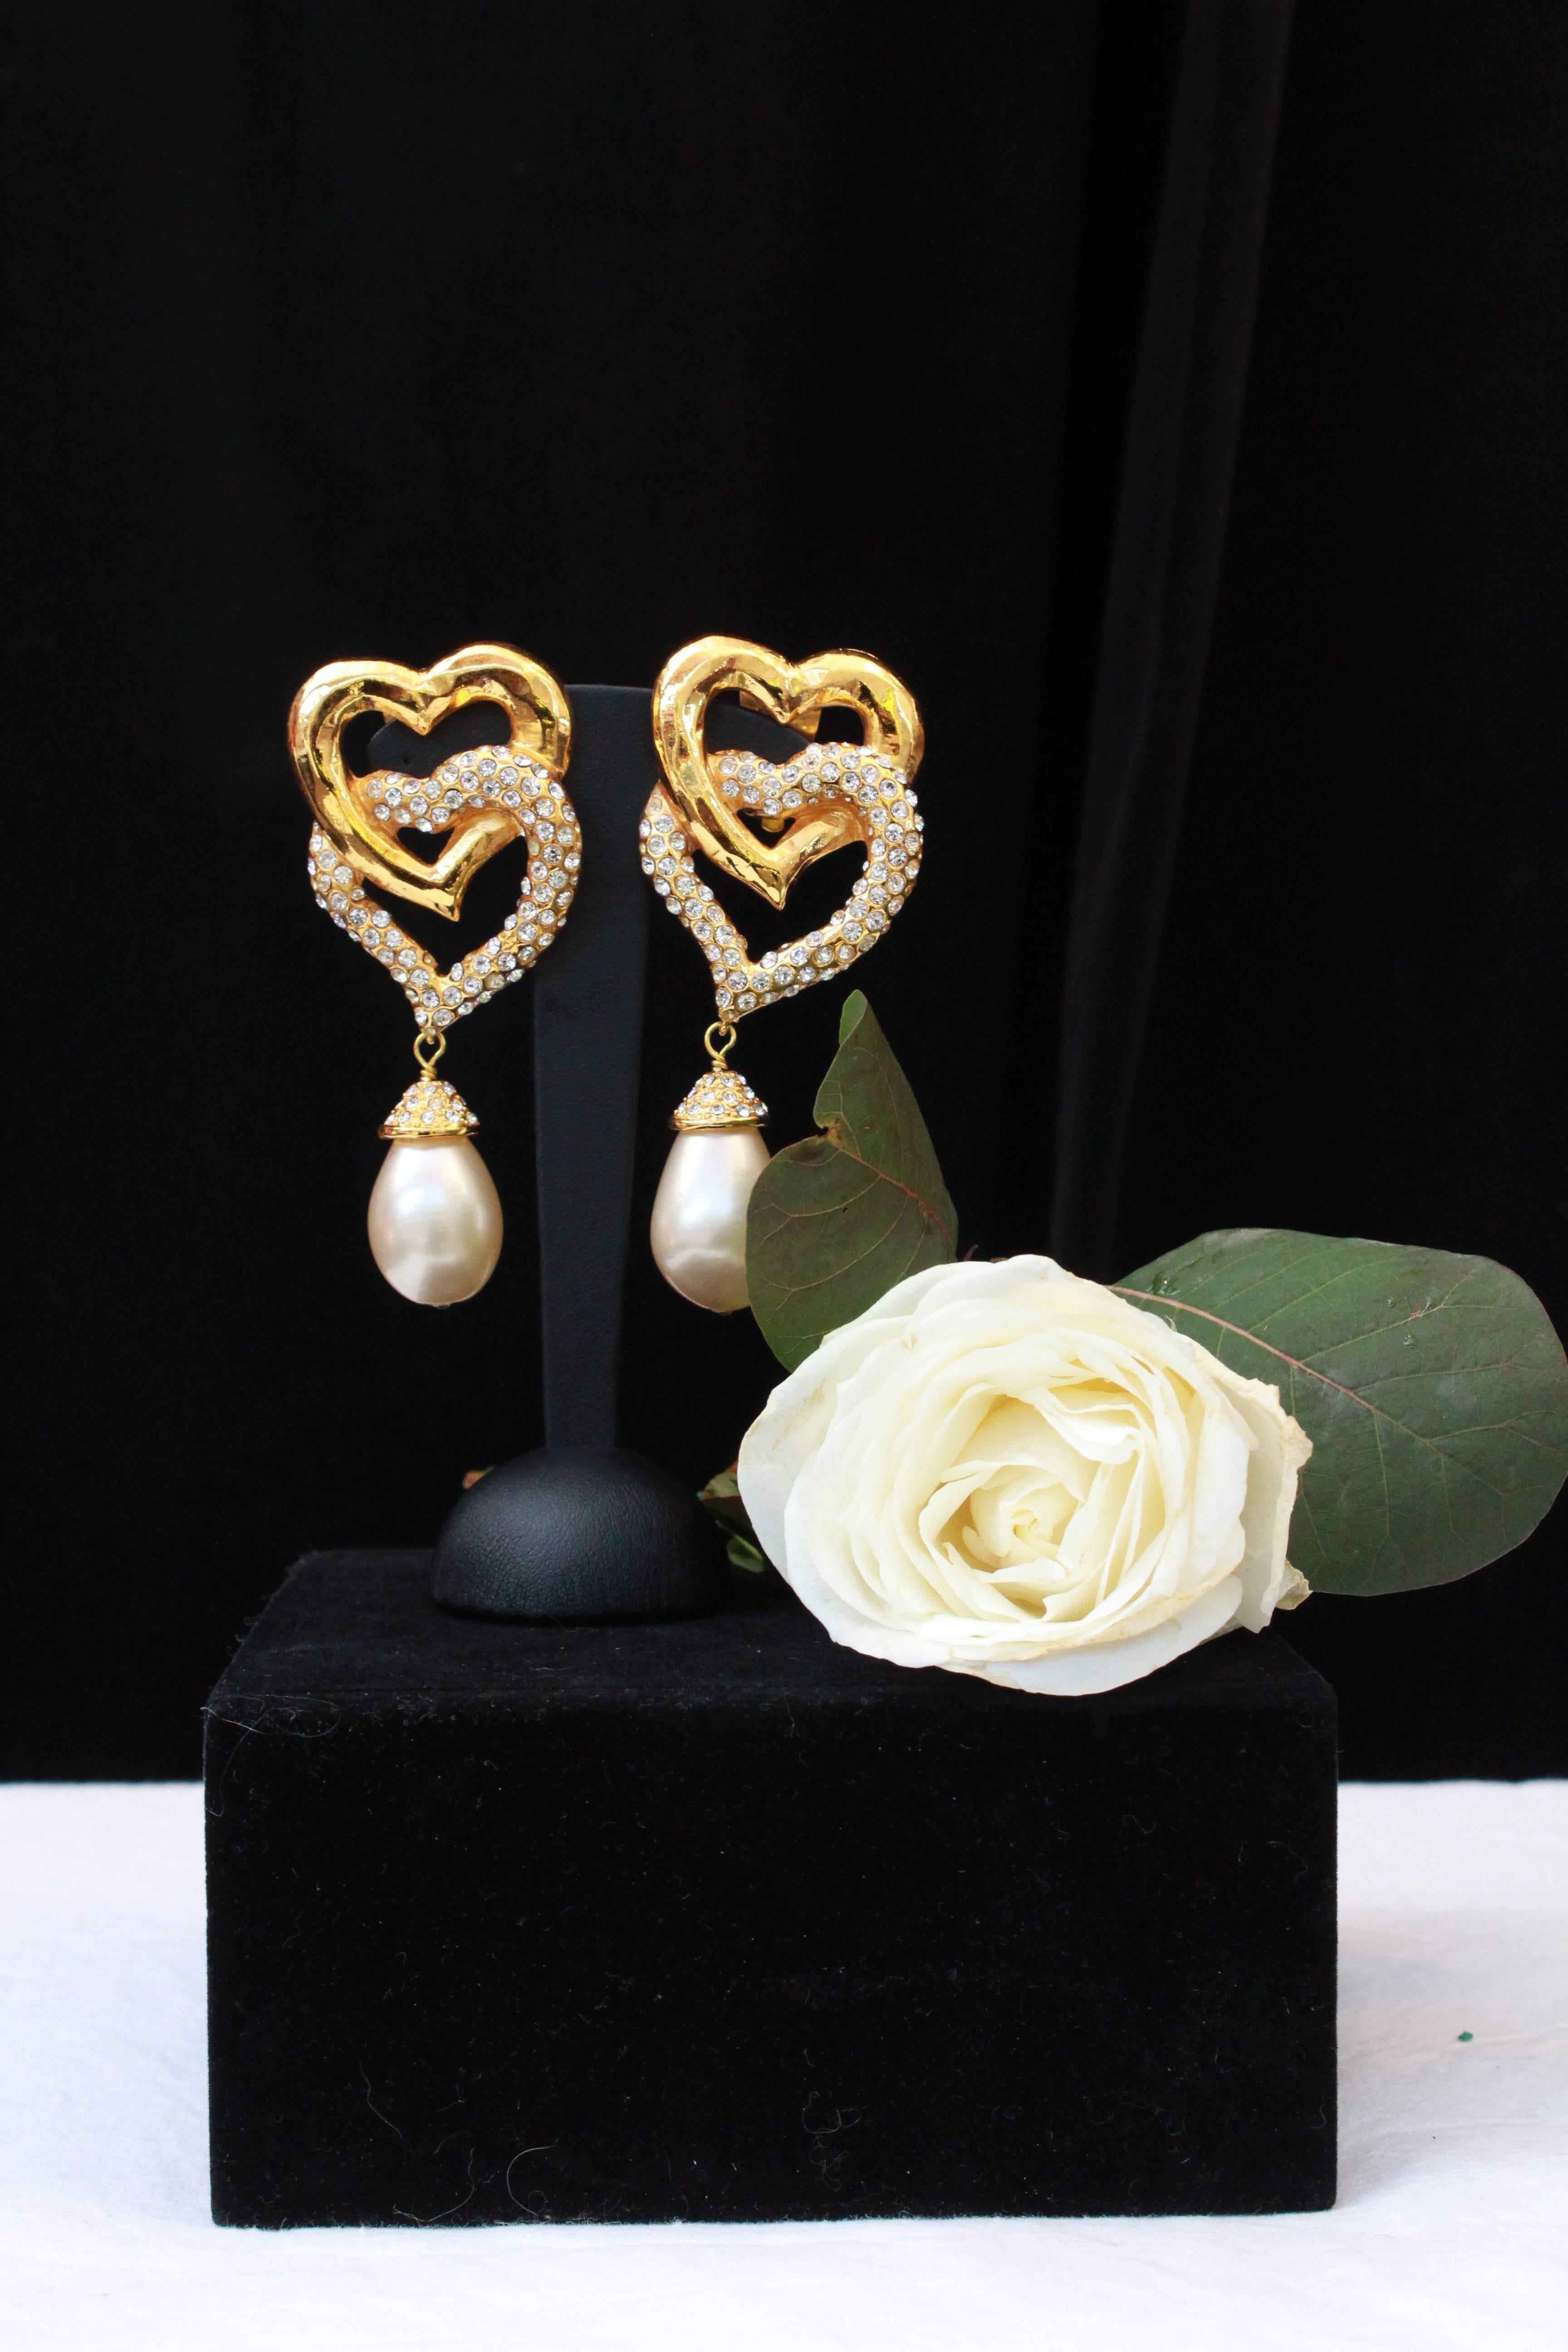 VALENTINO –  Gilded metal clip-on earrings representing two interlocked  hearts , one of them paved with Swarovski crystals. They are further embellished with a pearly teardrop topped with rhinestones.

Circa 1990.

Length 10 cm (4 in); Width 4 cm